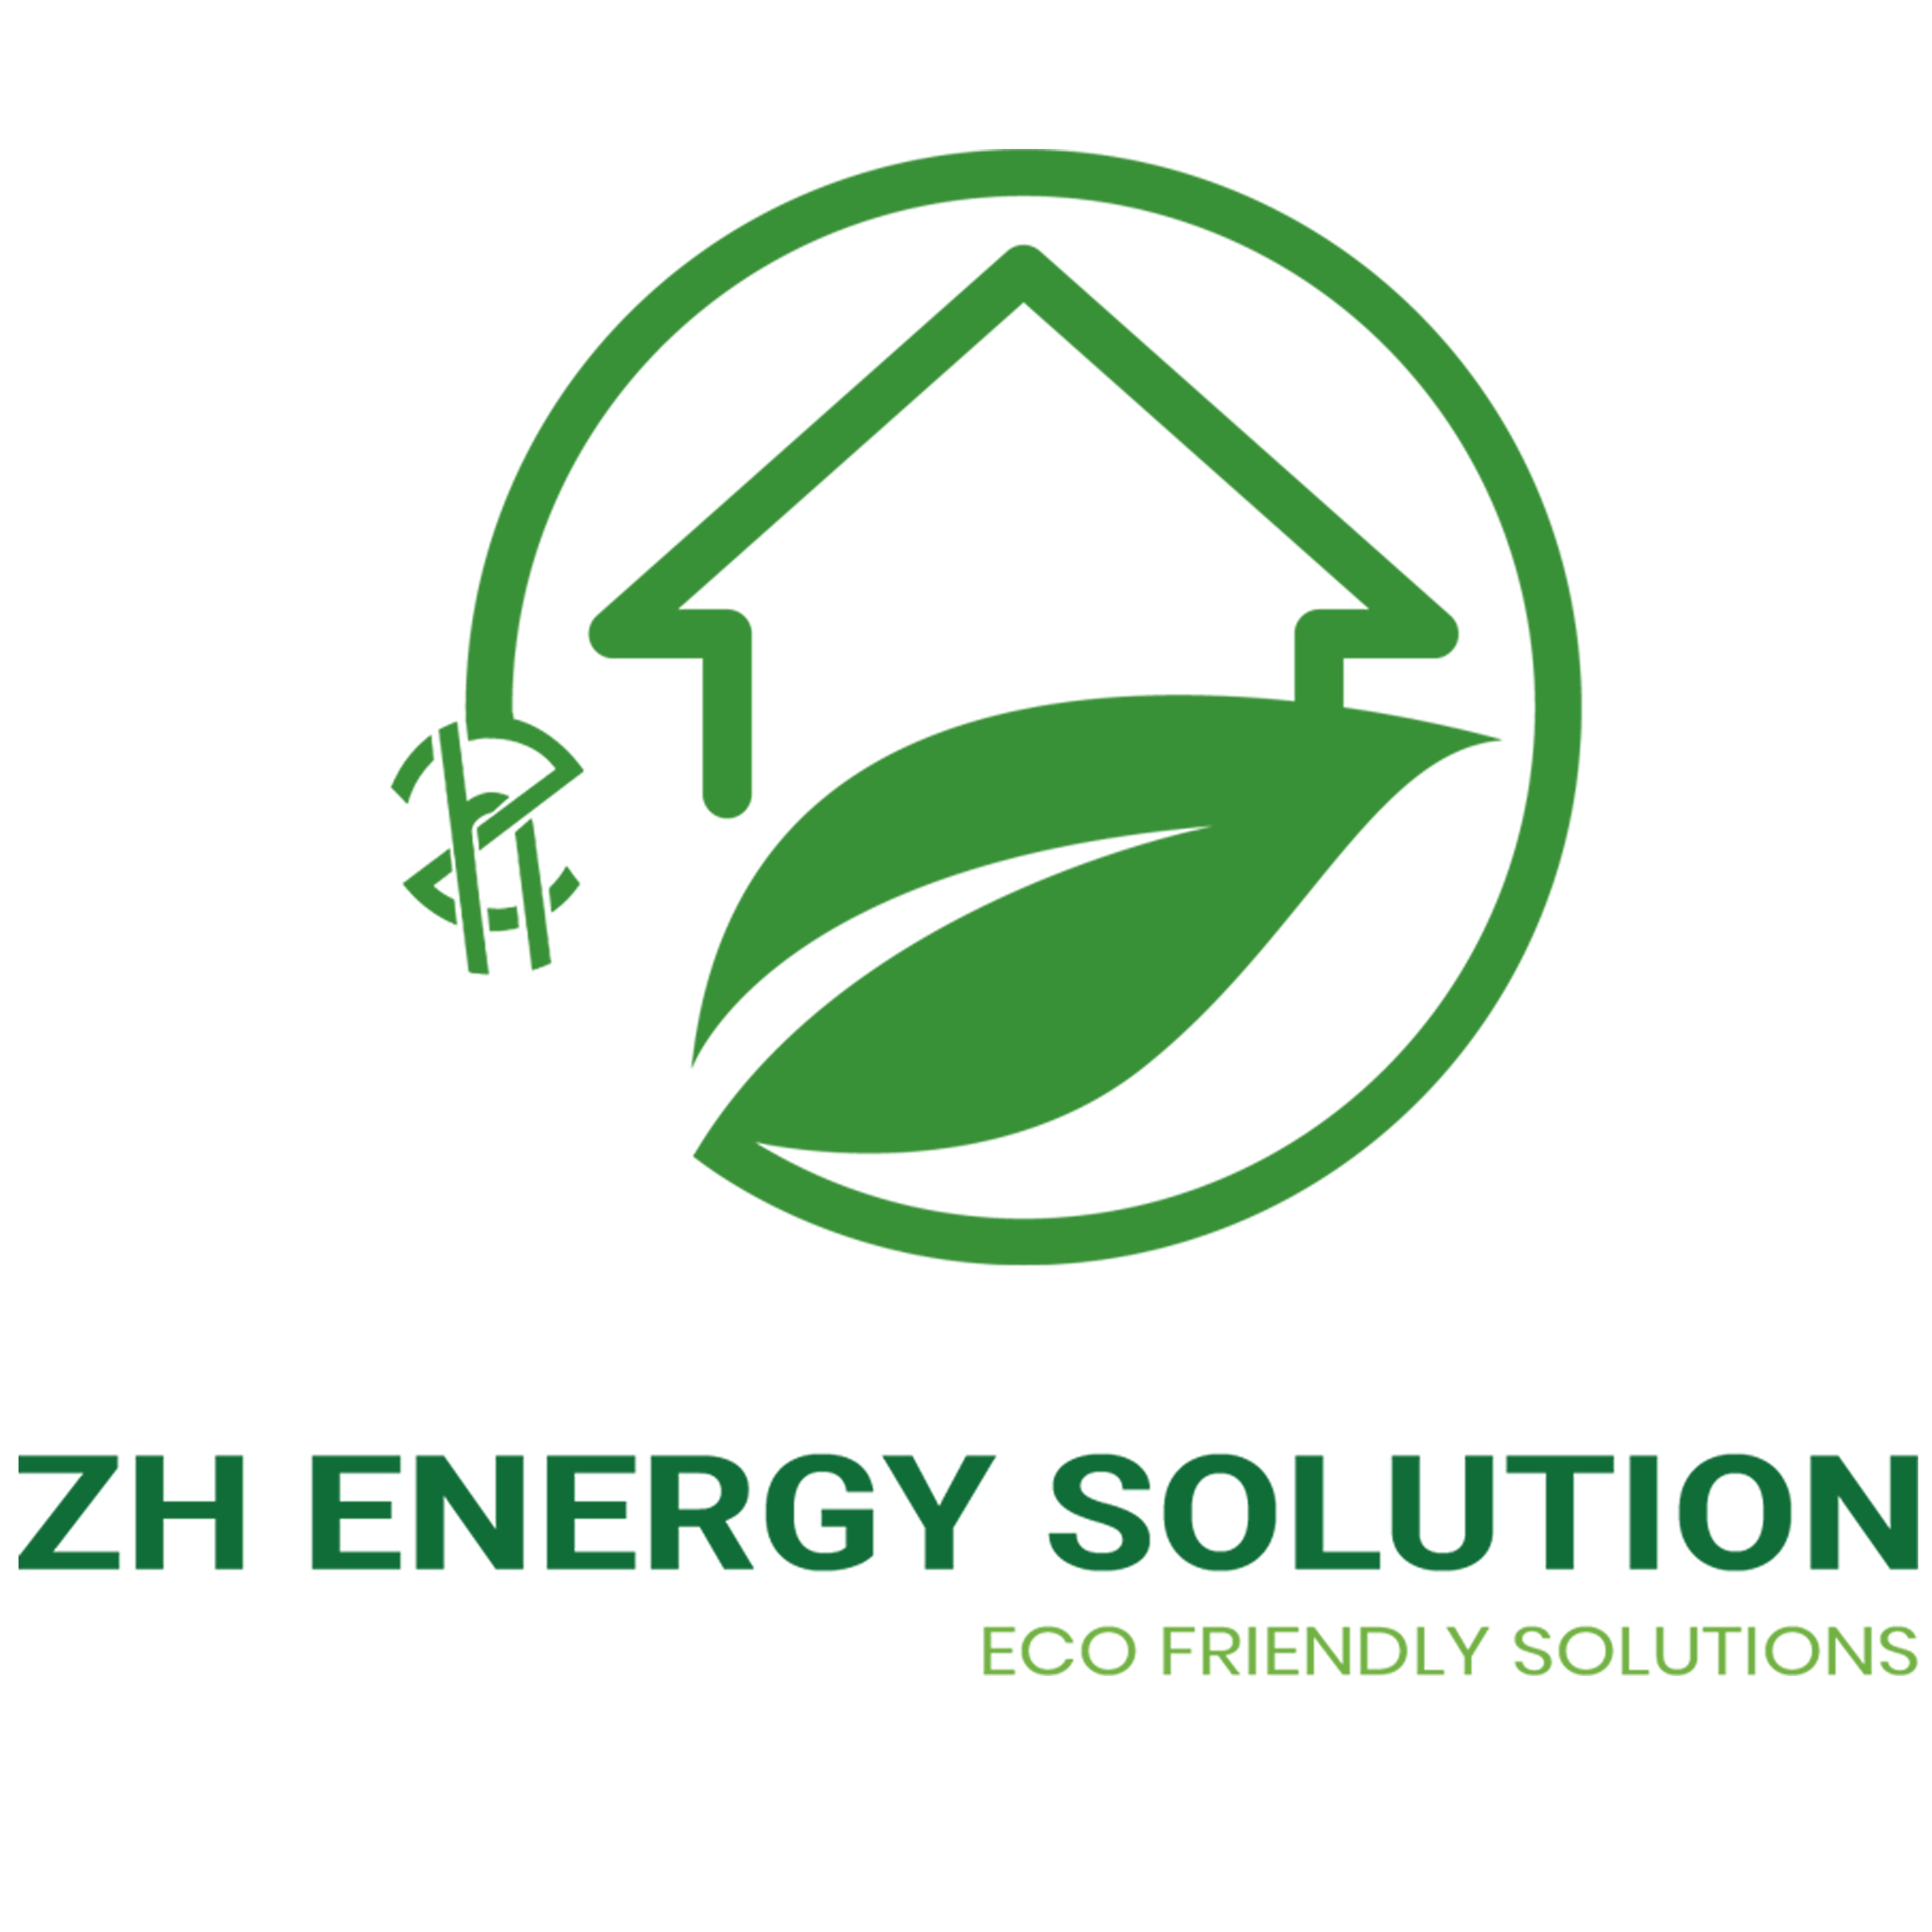 ZH Energy Solutions - Government Free Boiler Scheme Eco4 Grant | Boiler Service Uk